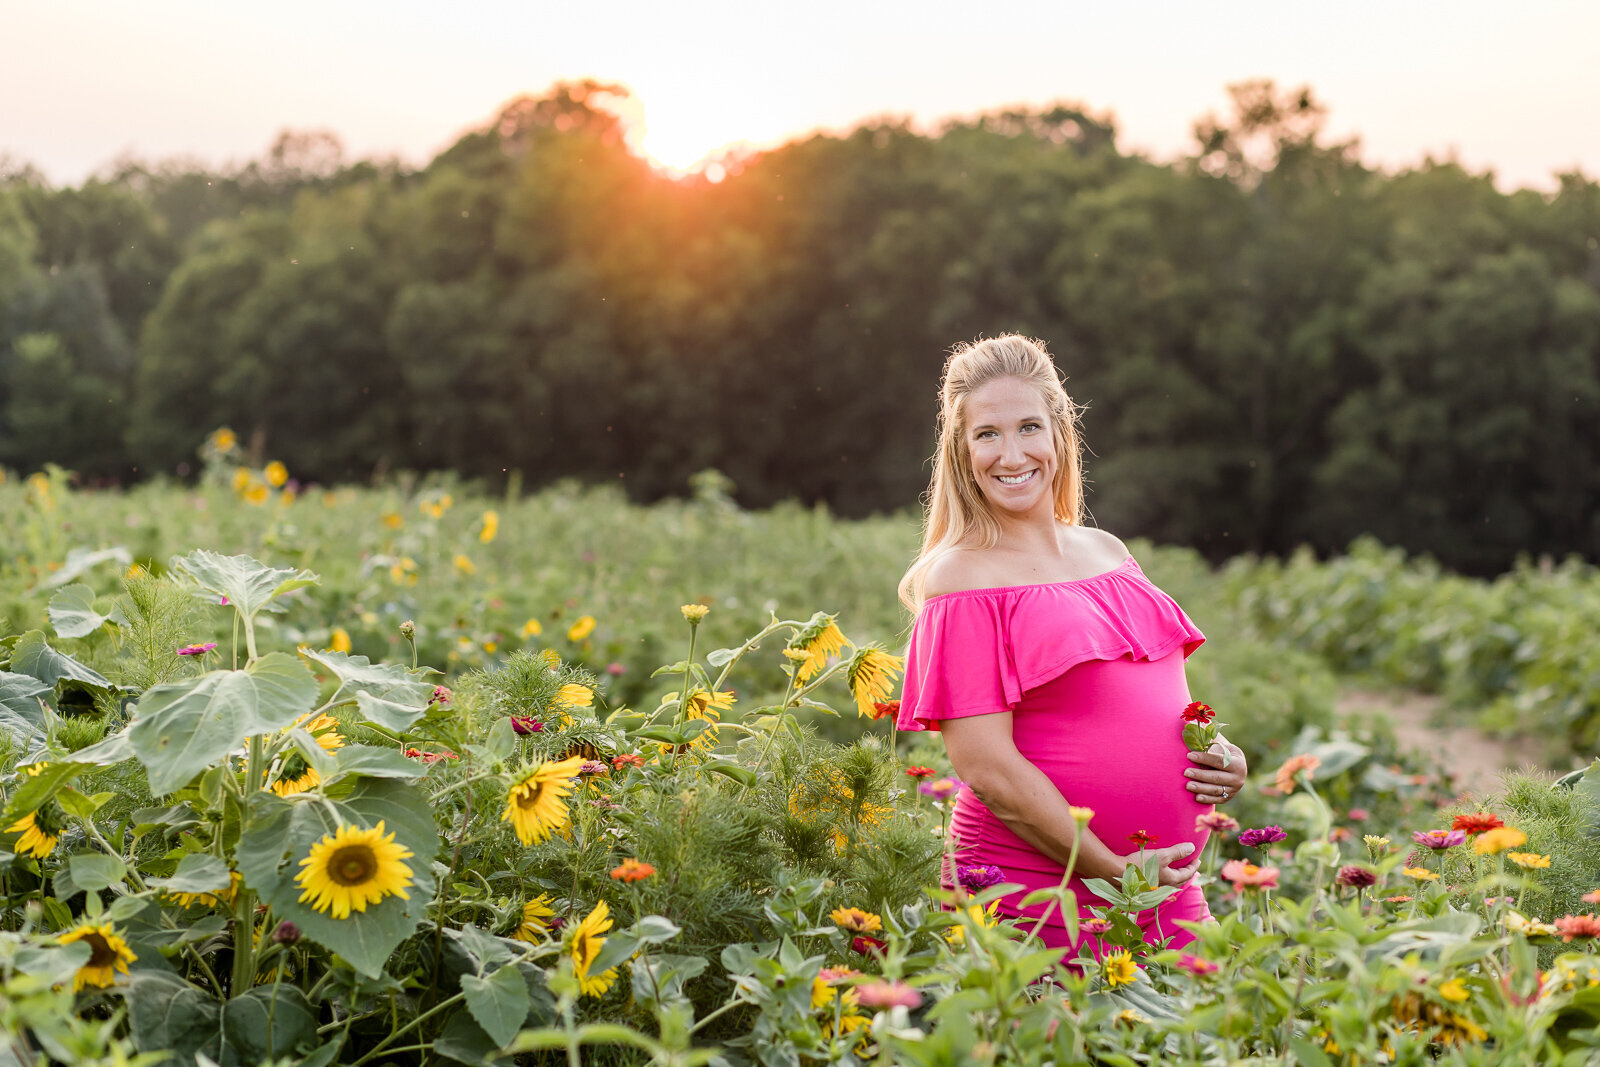 Outdoor_maternity_lifestyle_photography_session_Georgetown_KY_photographer-2